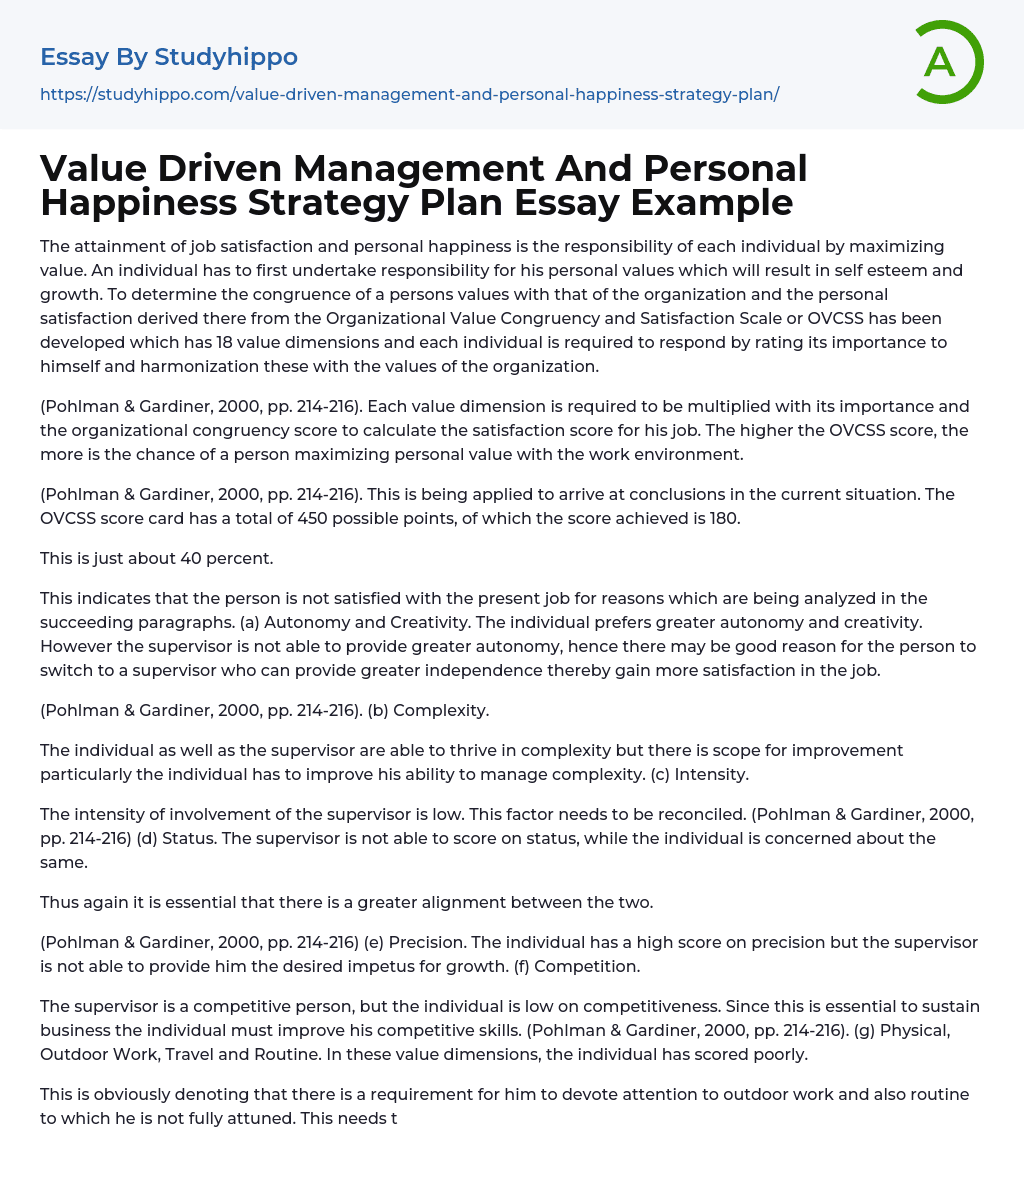 Value Driven Management And Personal Happiness Strategy Plan Essay Example